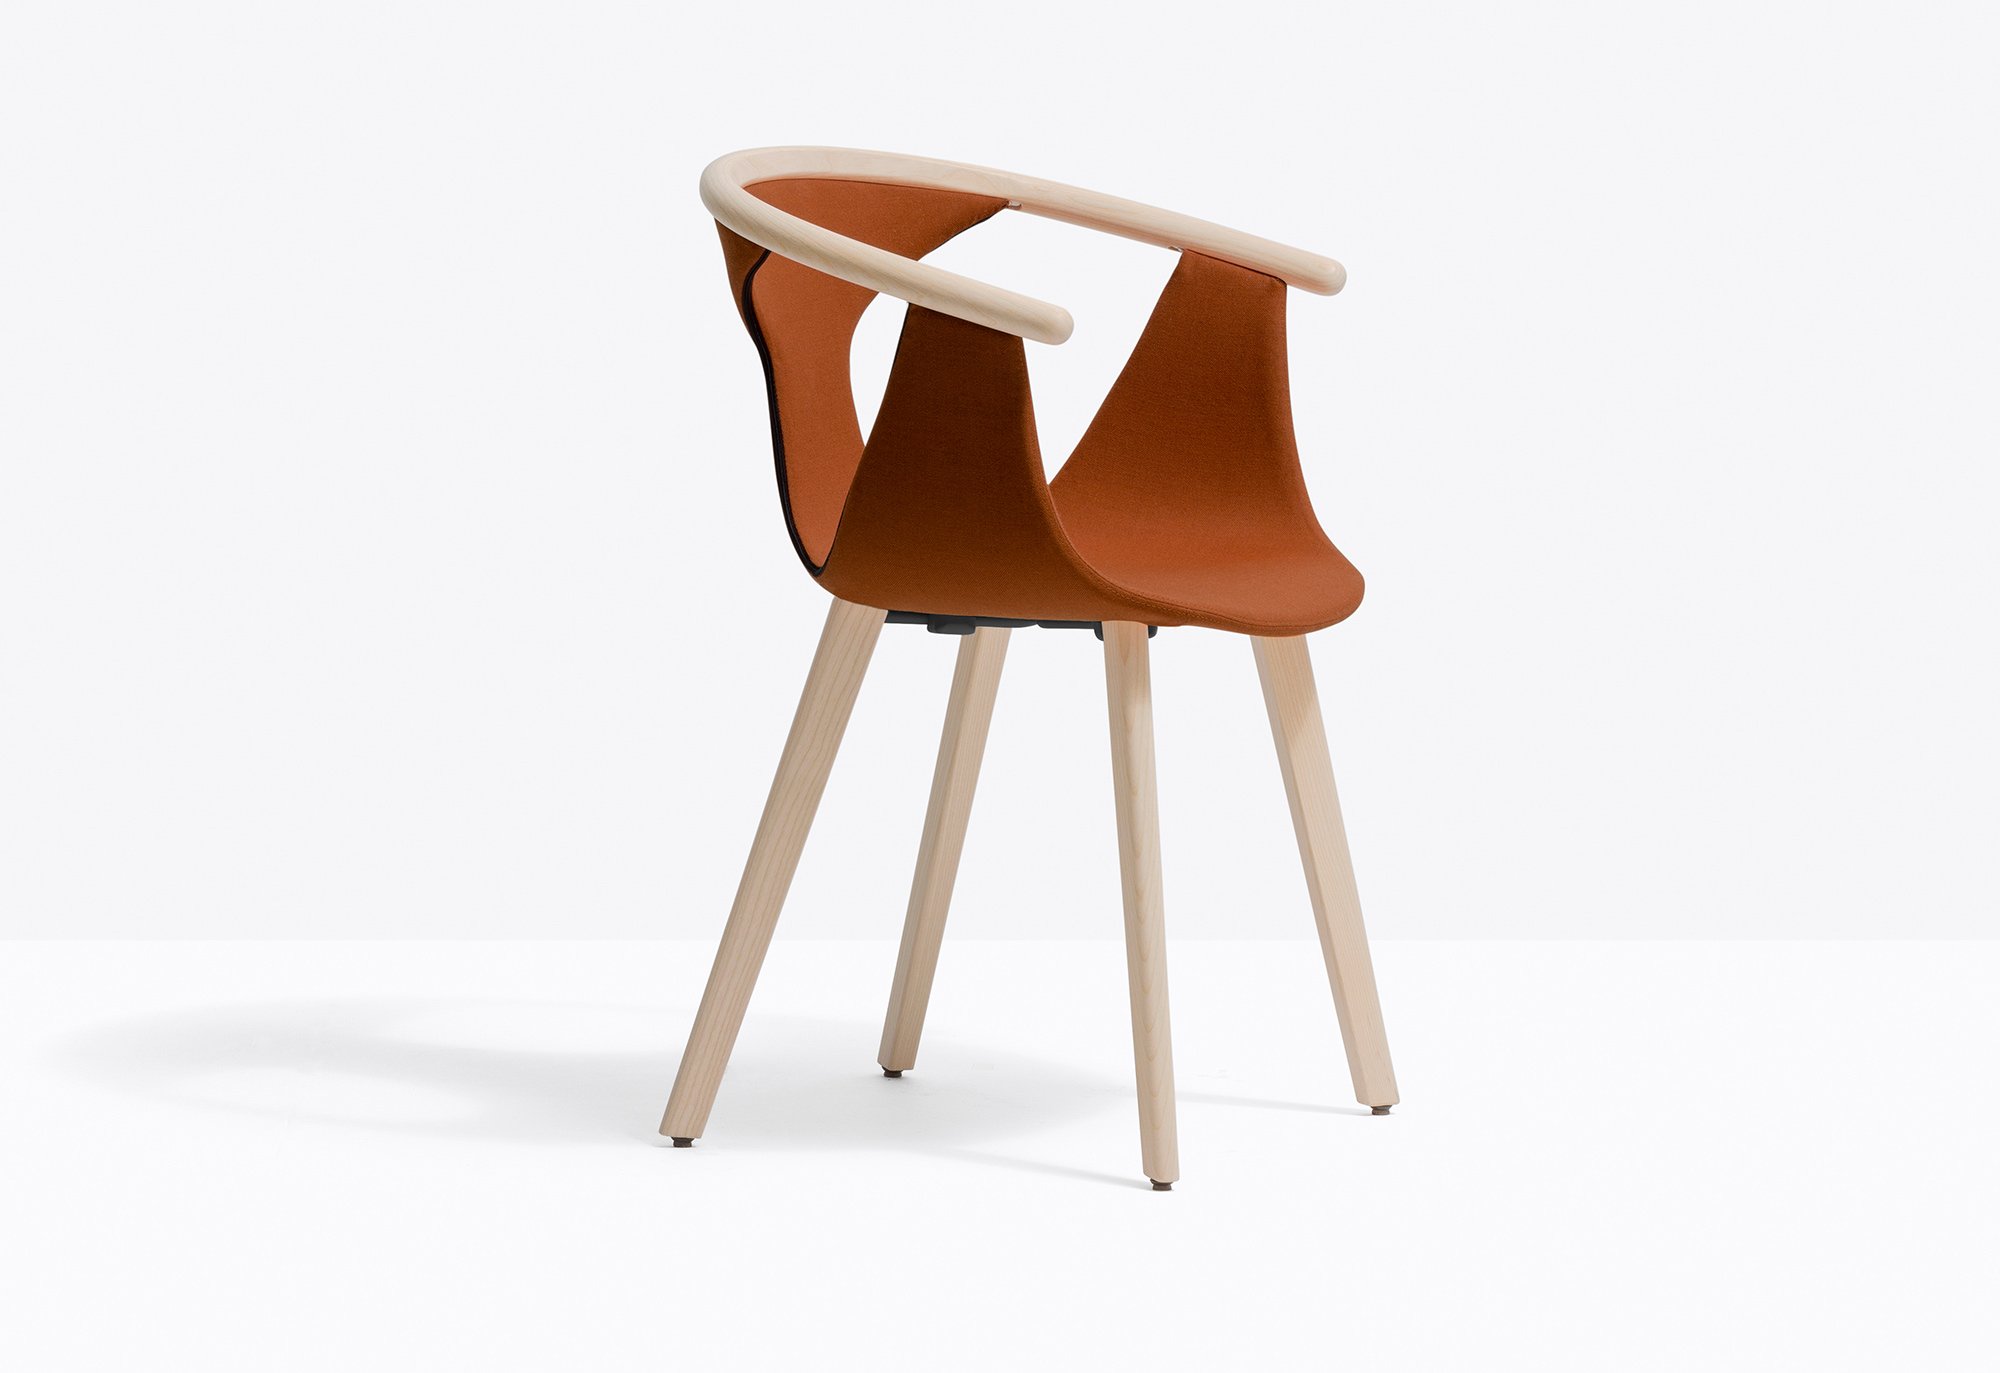 Fox Soft Chair from Pedrali, designed by Patrick Norguet